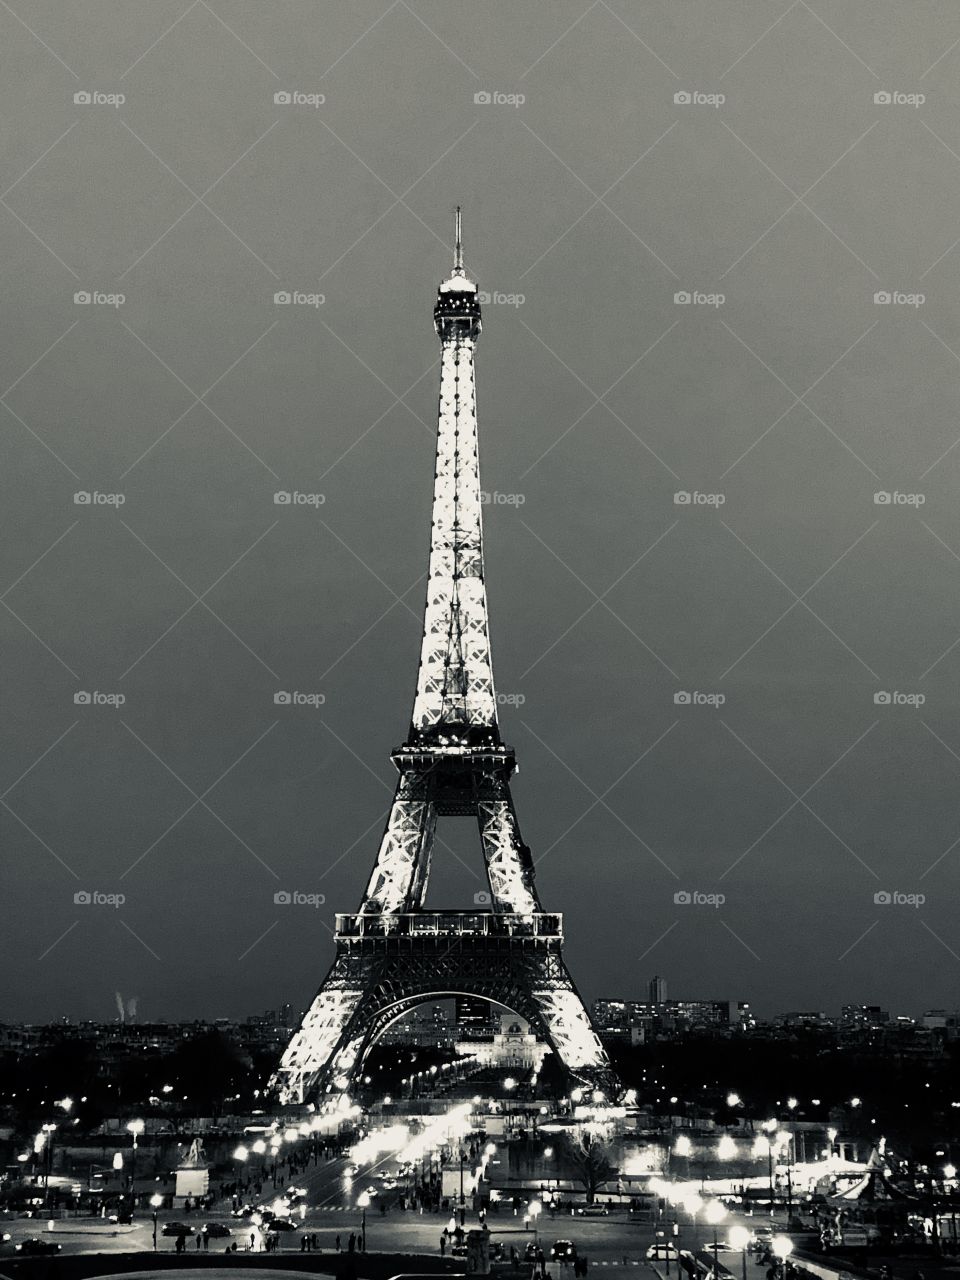 A stunning photo of the Eiffel Tower illuminated,taken in black and white just past sunset. 